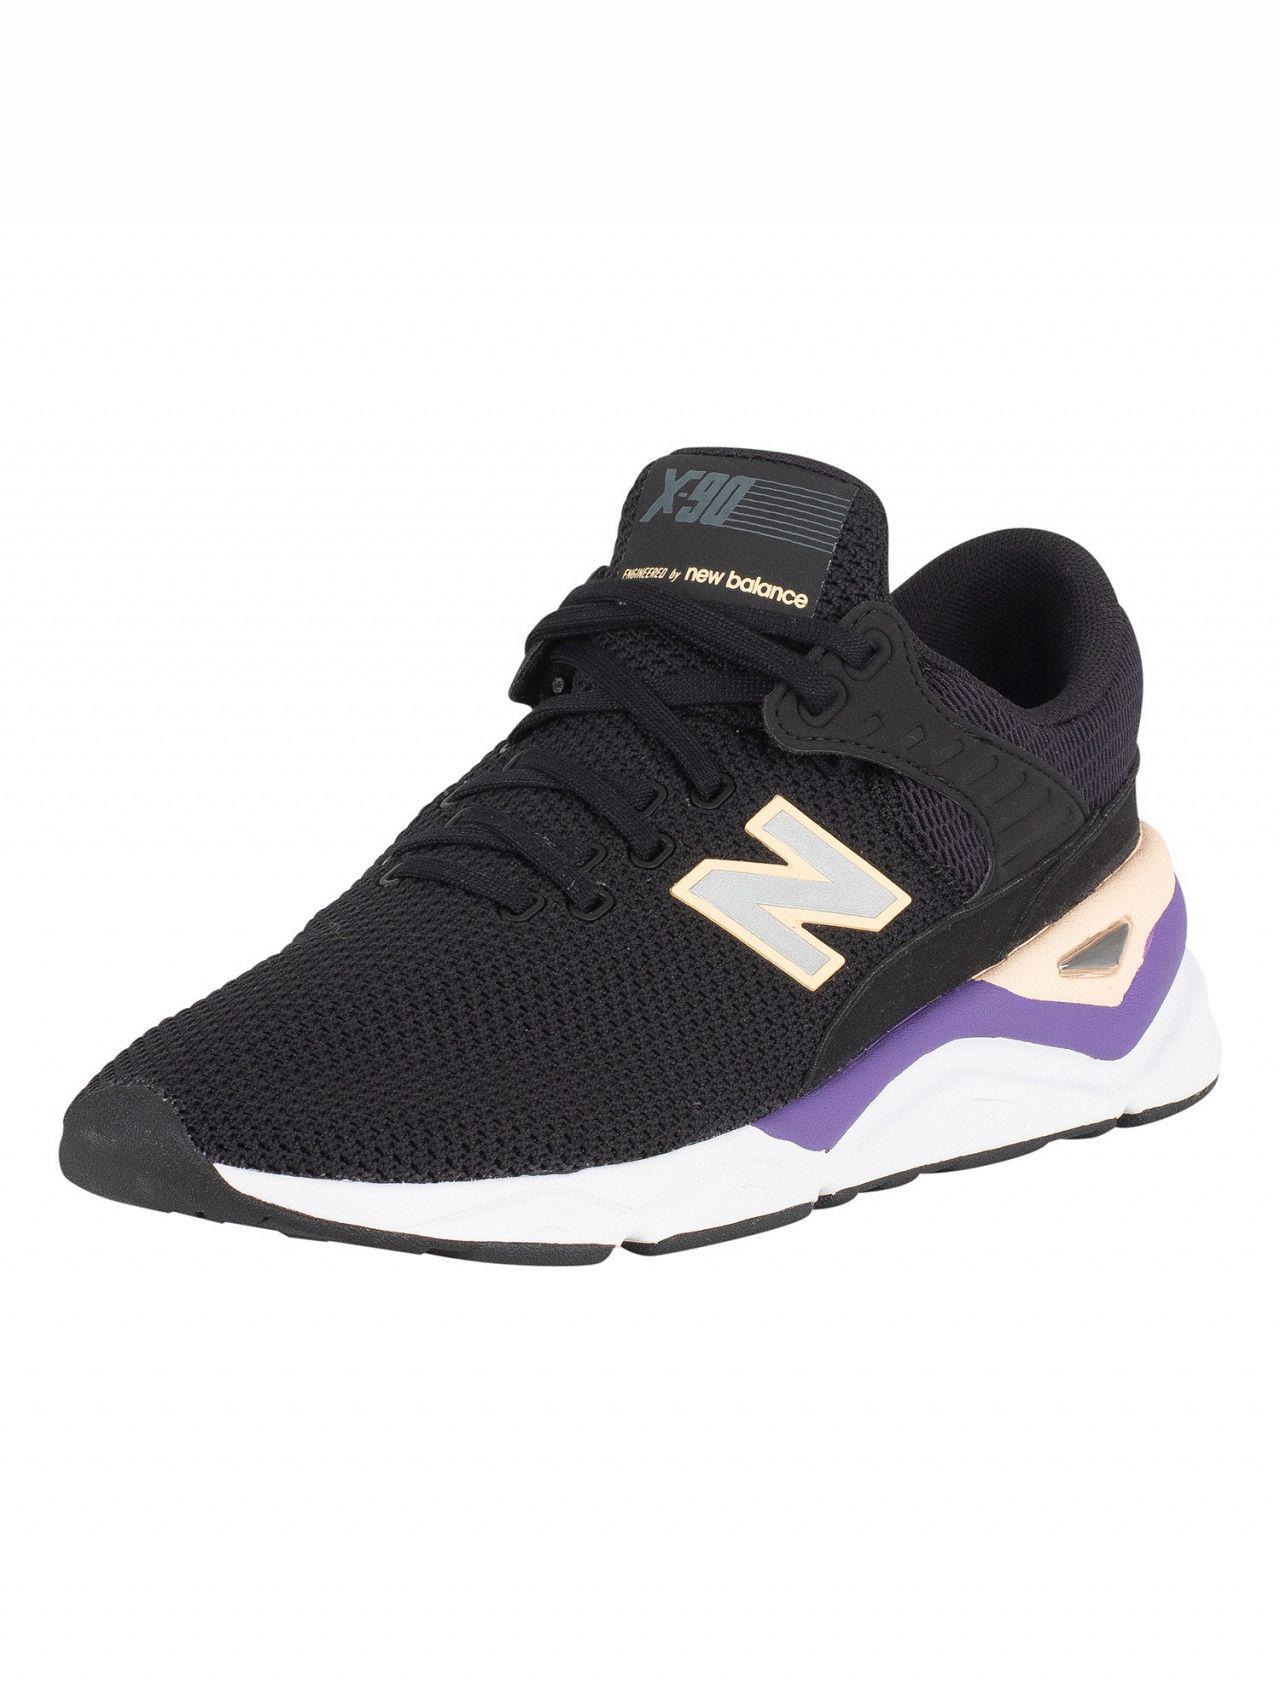 New Balance Lace Black/purple/pink X-90 Trainers for Men - Lyst